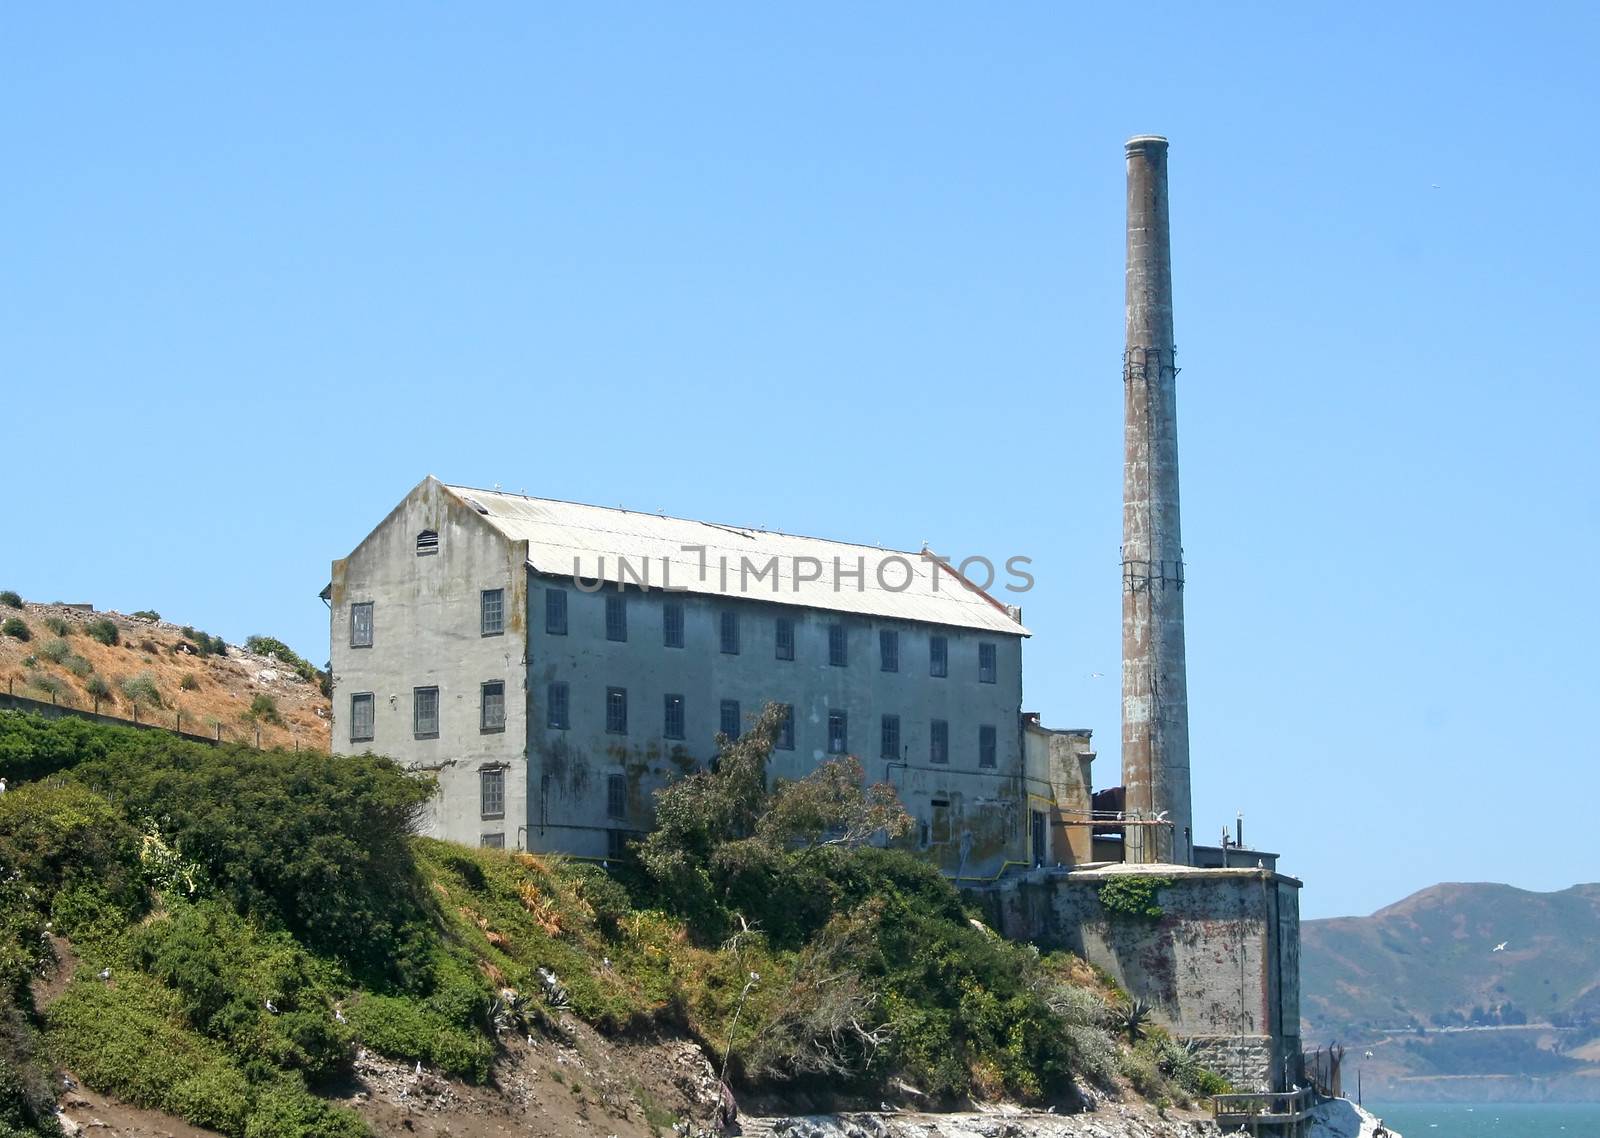 The ruins of the smoke stack and part of the power house facing South on Alcatraz Island.